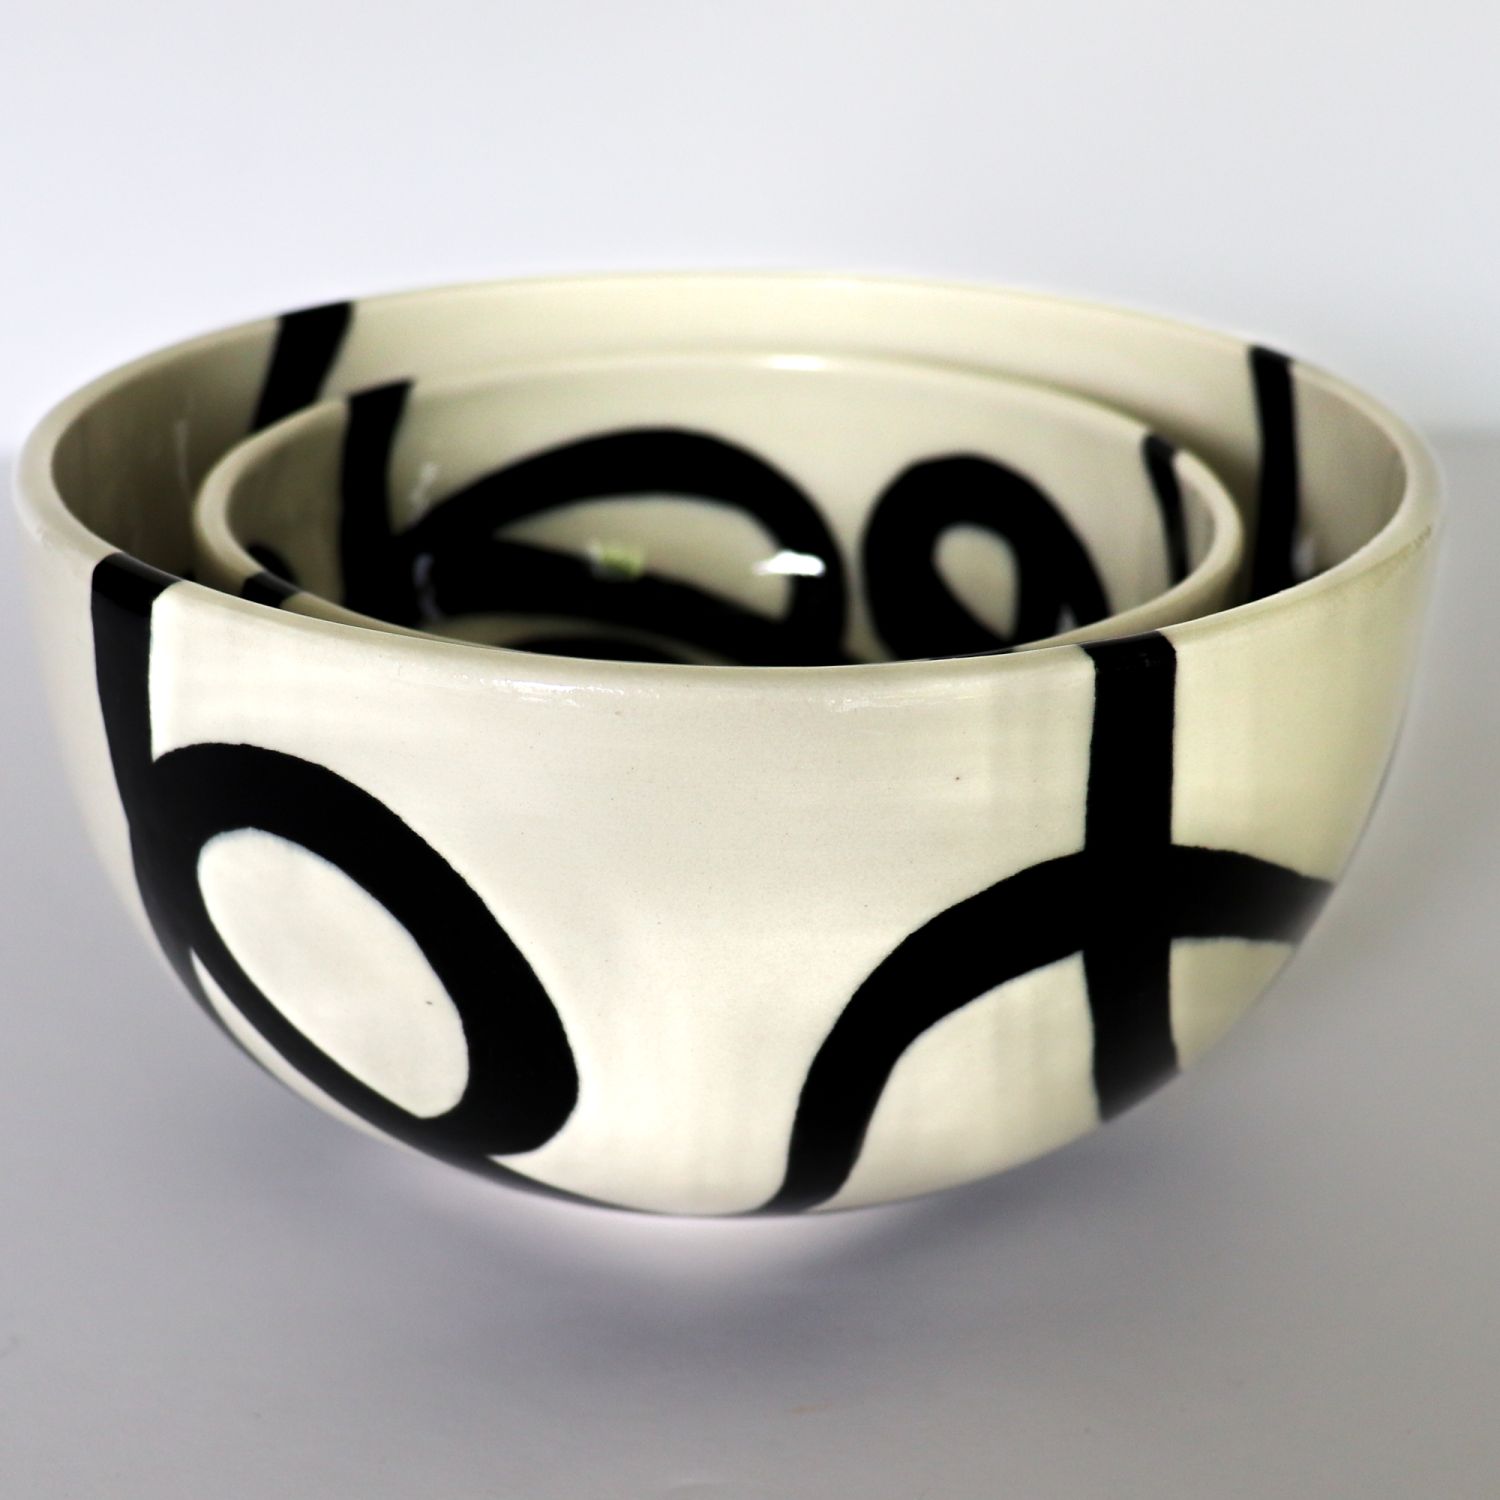 Alana Marcoccia: Interconnected Nesting Bowl – Small Product Image 4 of 9